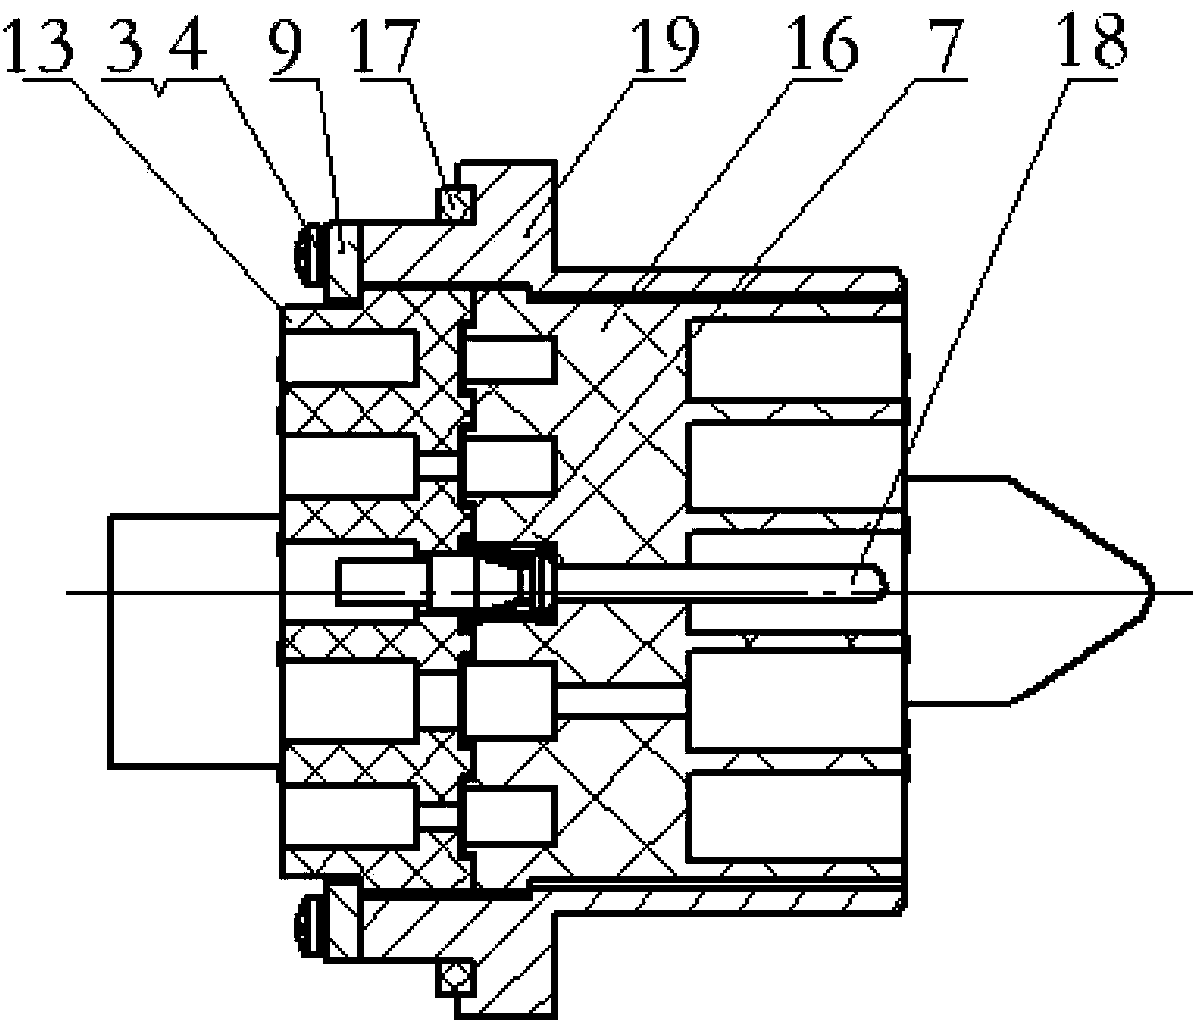 Multiple-freedom-degree floating electric connector with self-calibration function